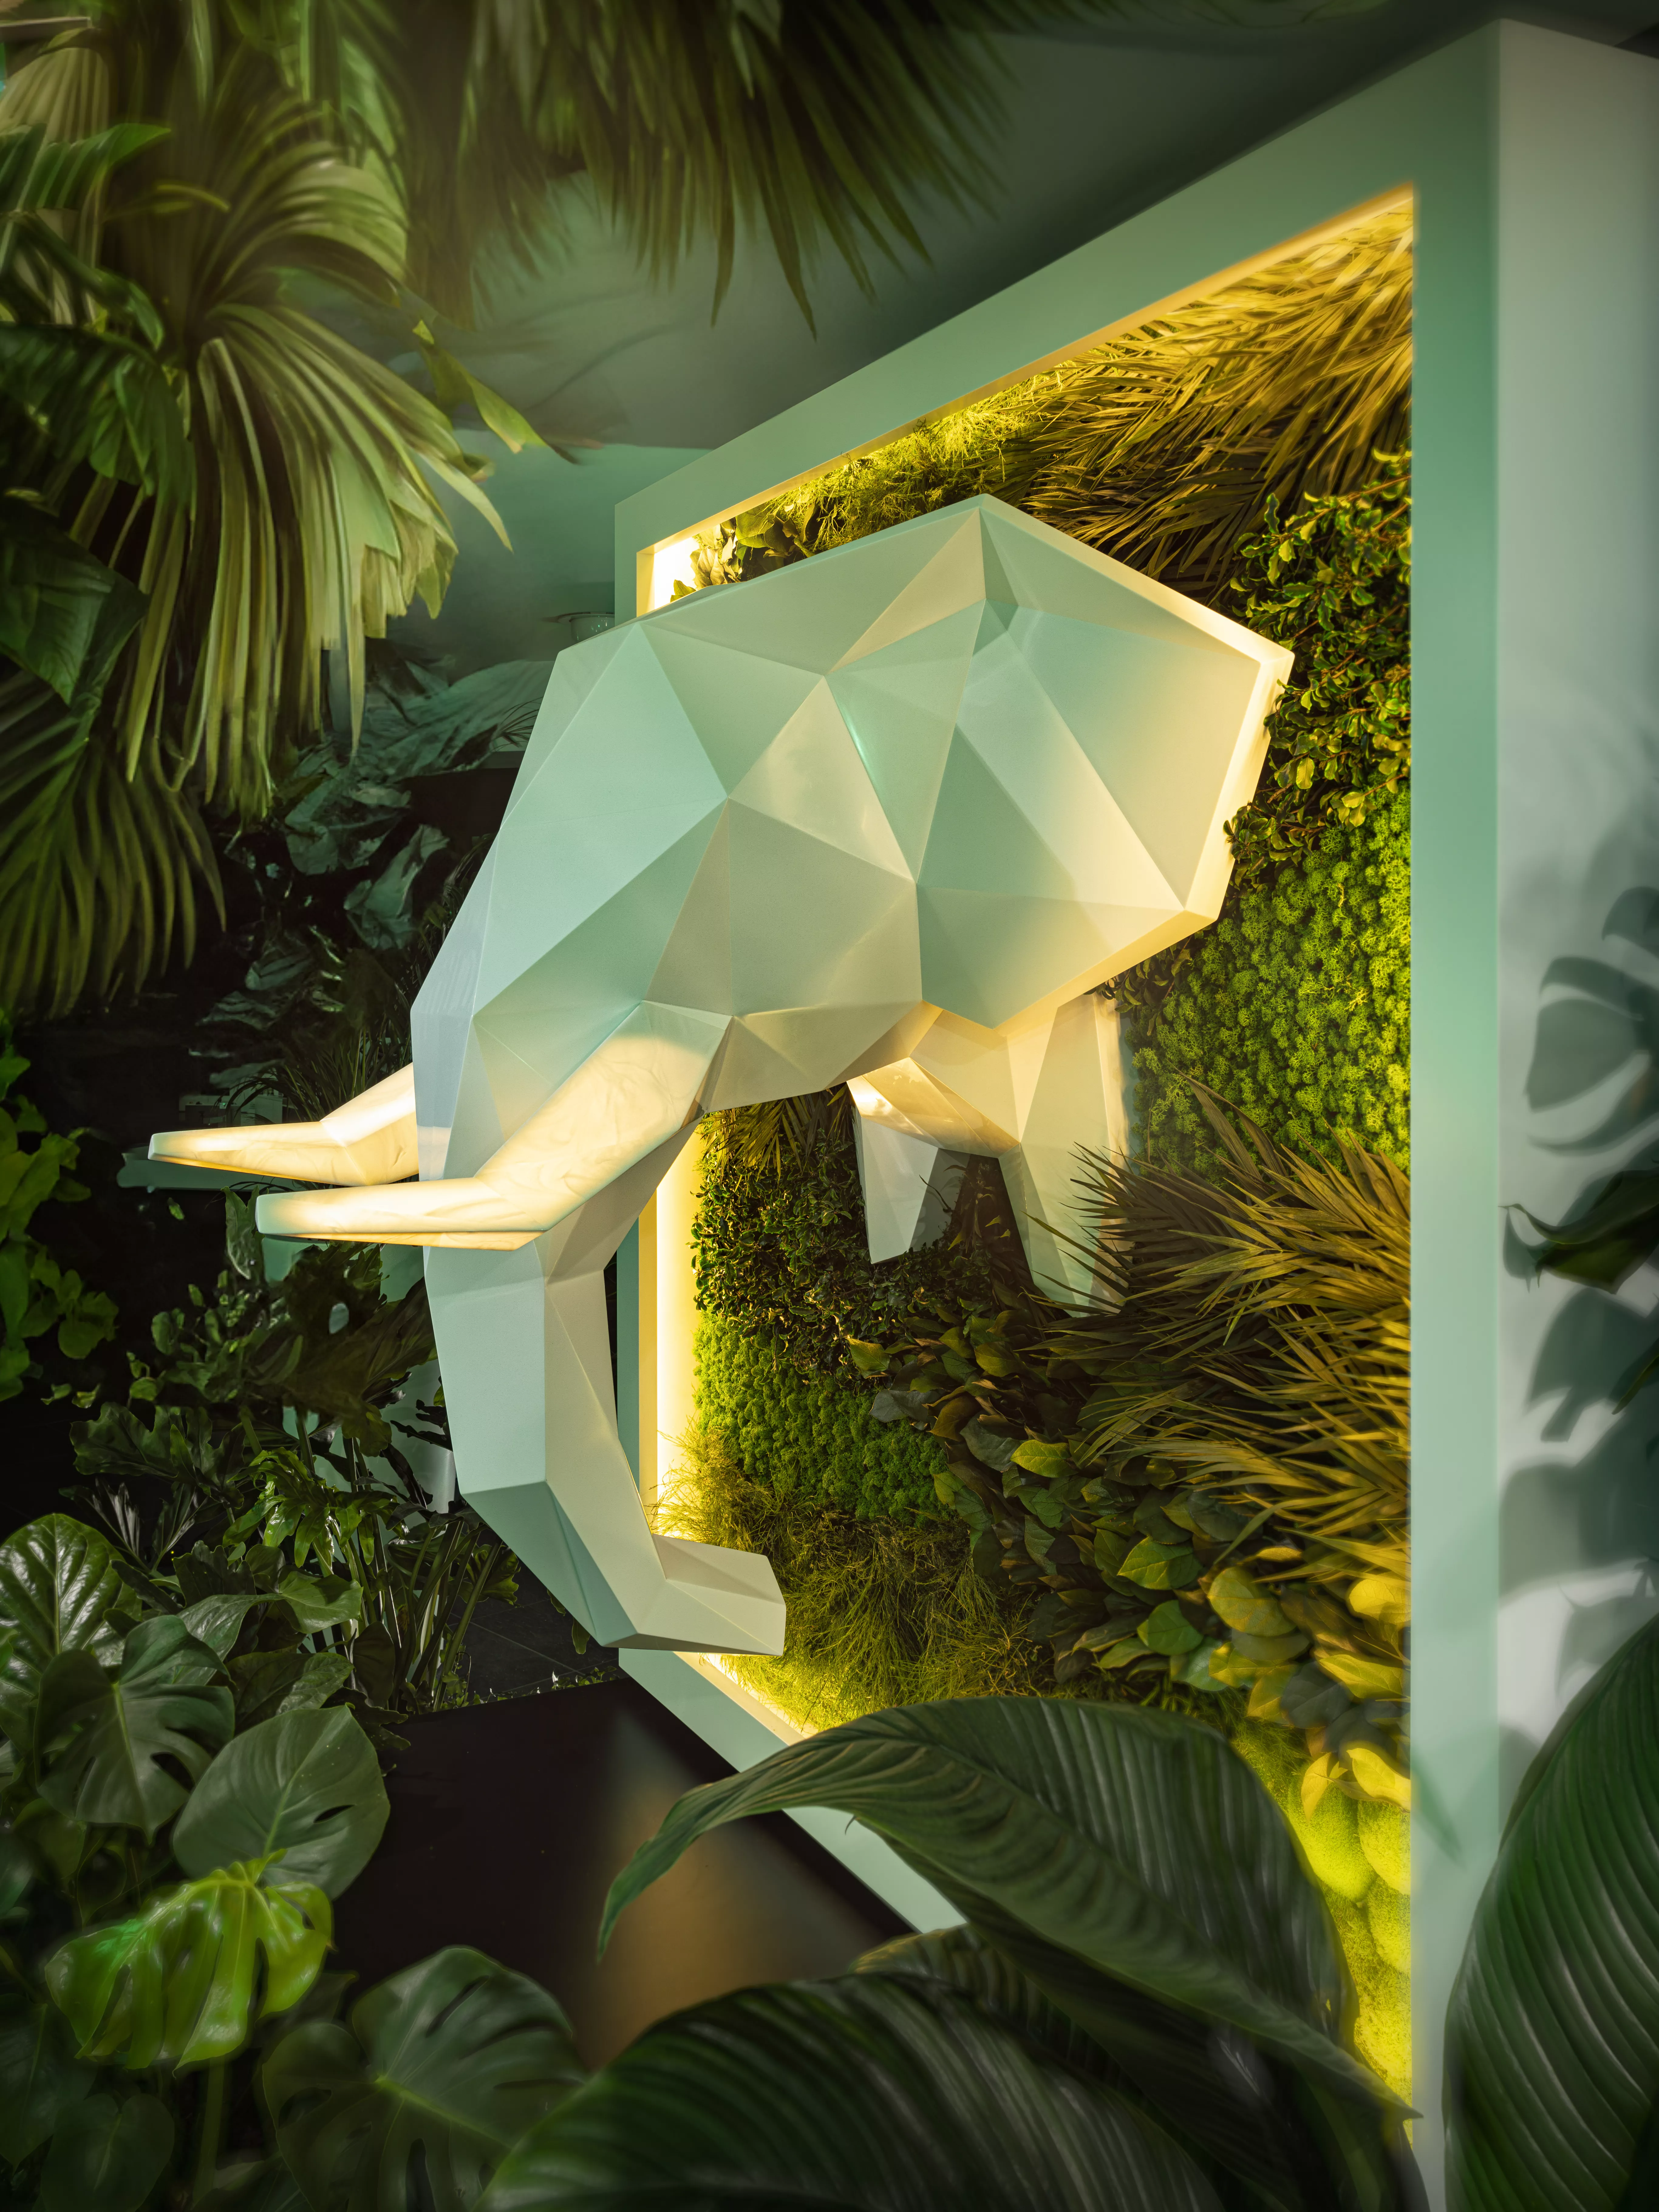 HIMACS and Aska invite you to venture into a pop-up jungle in the heart of Paris